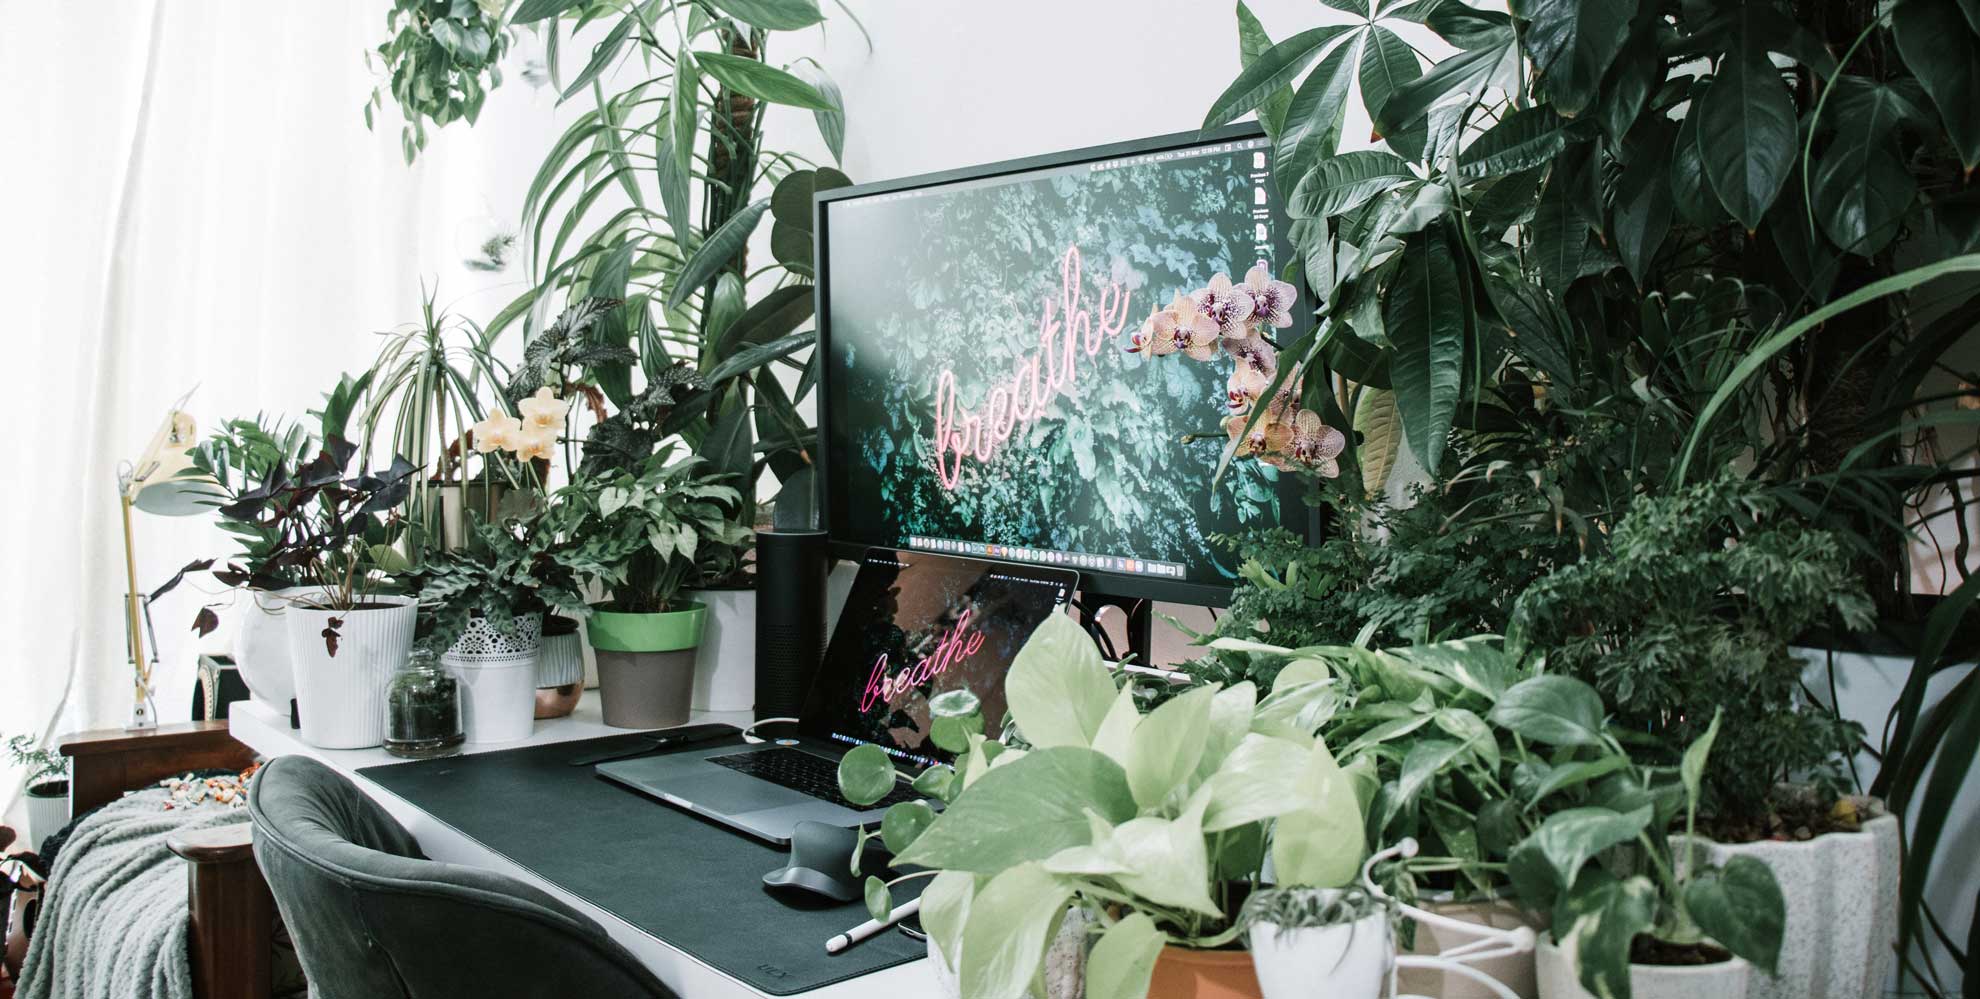 Computer surrounded by growing plants on a desk.